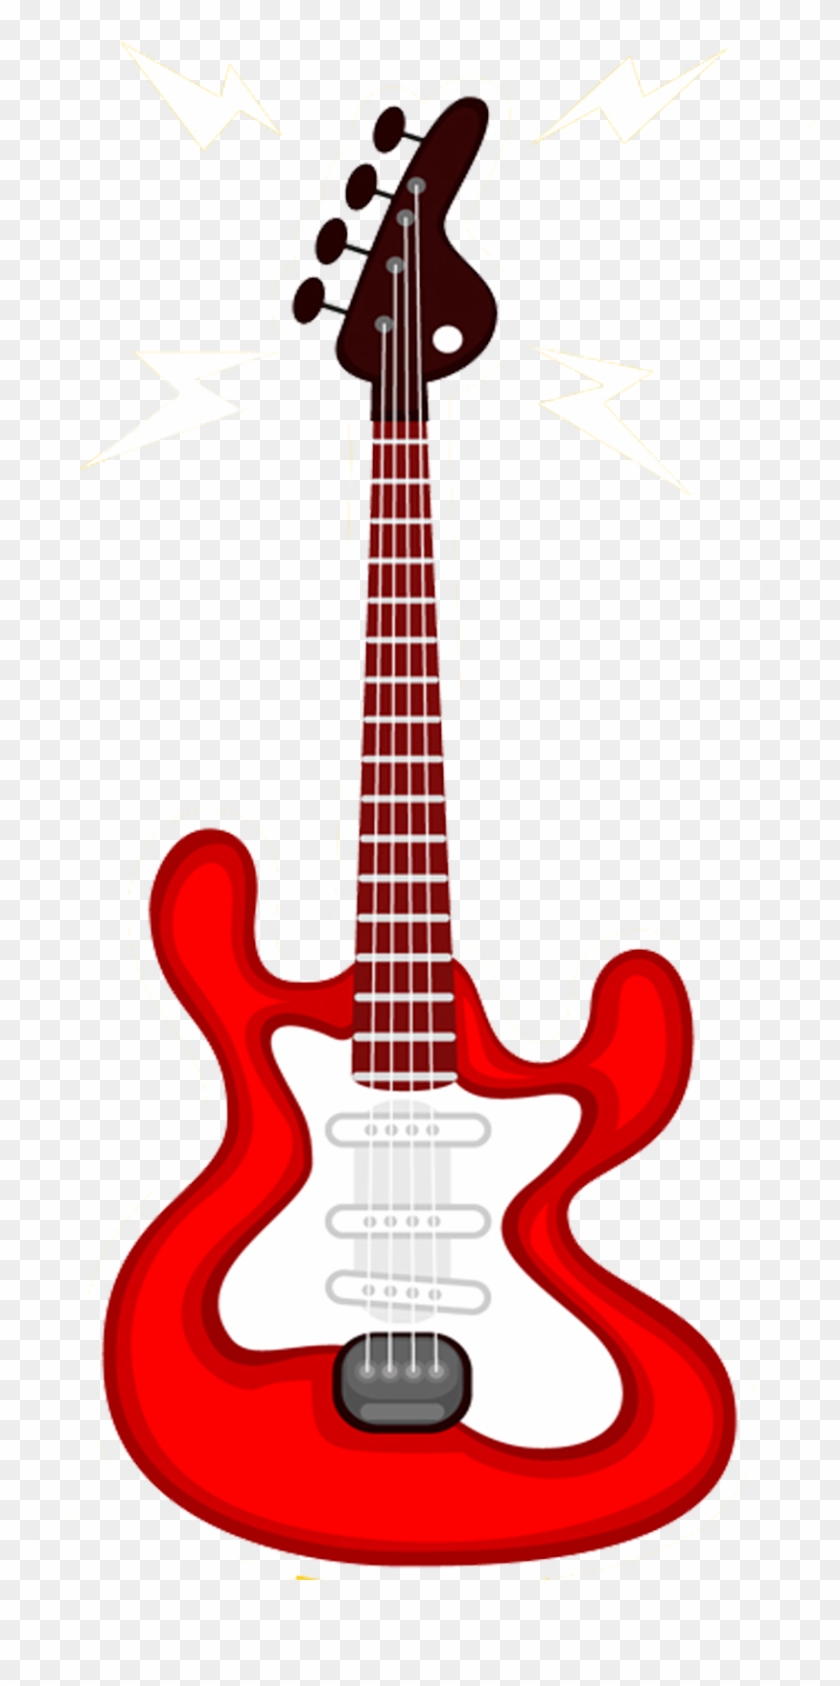 Electric Guitar Drawing Poster Music - Electric Guitar Drawing Poster Music #1013371